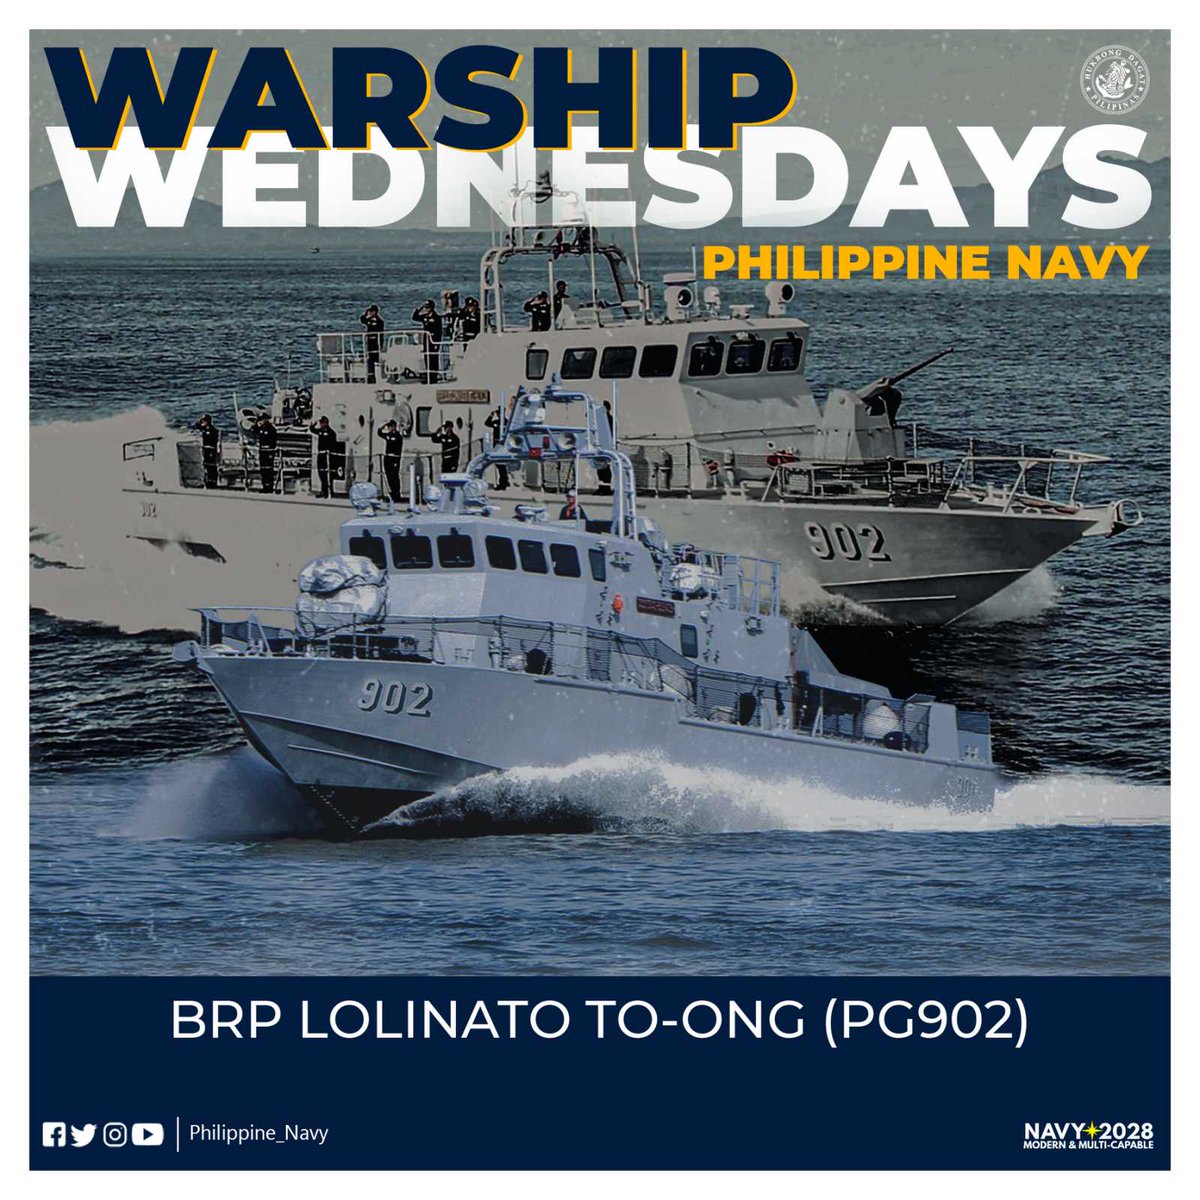 WARSHIP WEDNESDAYS BRP Lolinato To-ong (PG902) is the 2nd ship of the Acero-class patrol gunboats of the Philippine Navy. She was named after the Philippine Medal of Valor Awardee, Marine 1Lt Lolinato To-ong. #ModernandMultiCapablePHNavy #AFPyoucanTRUST